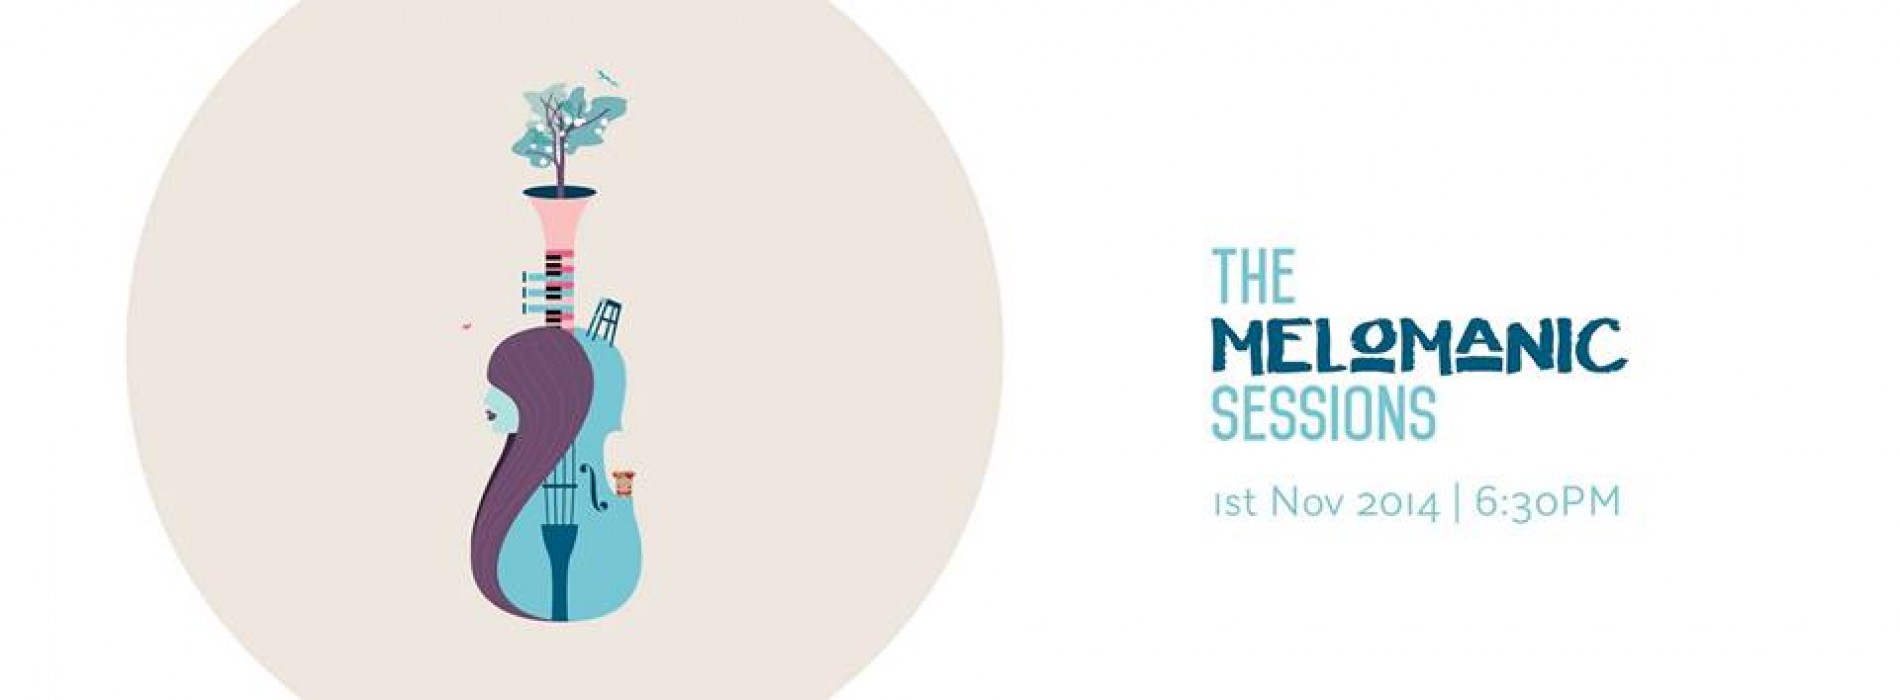 The Melomanic Sessions – November